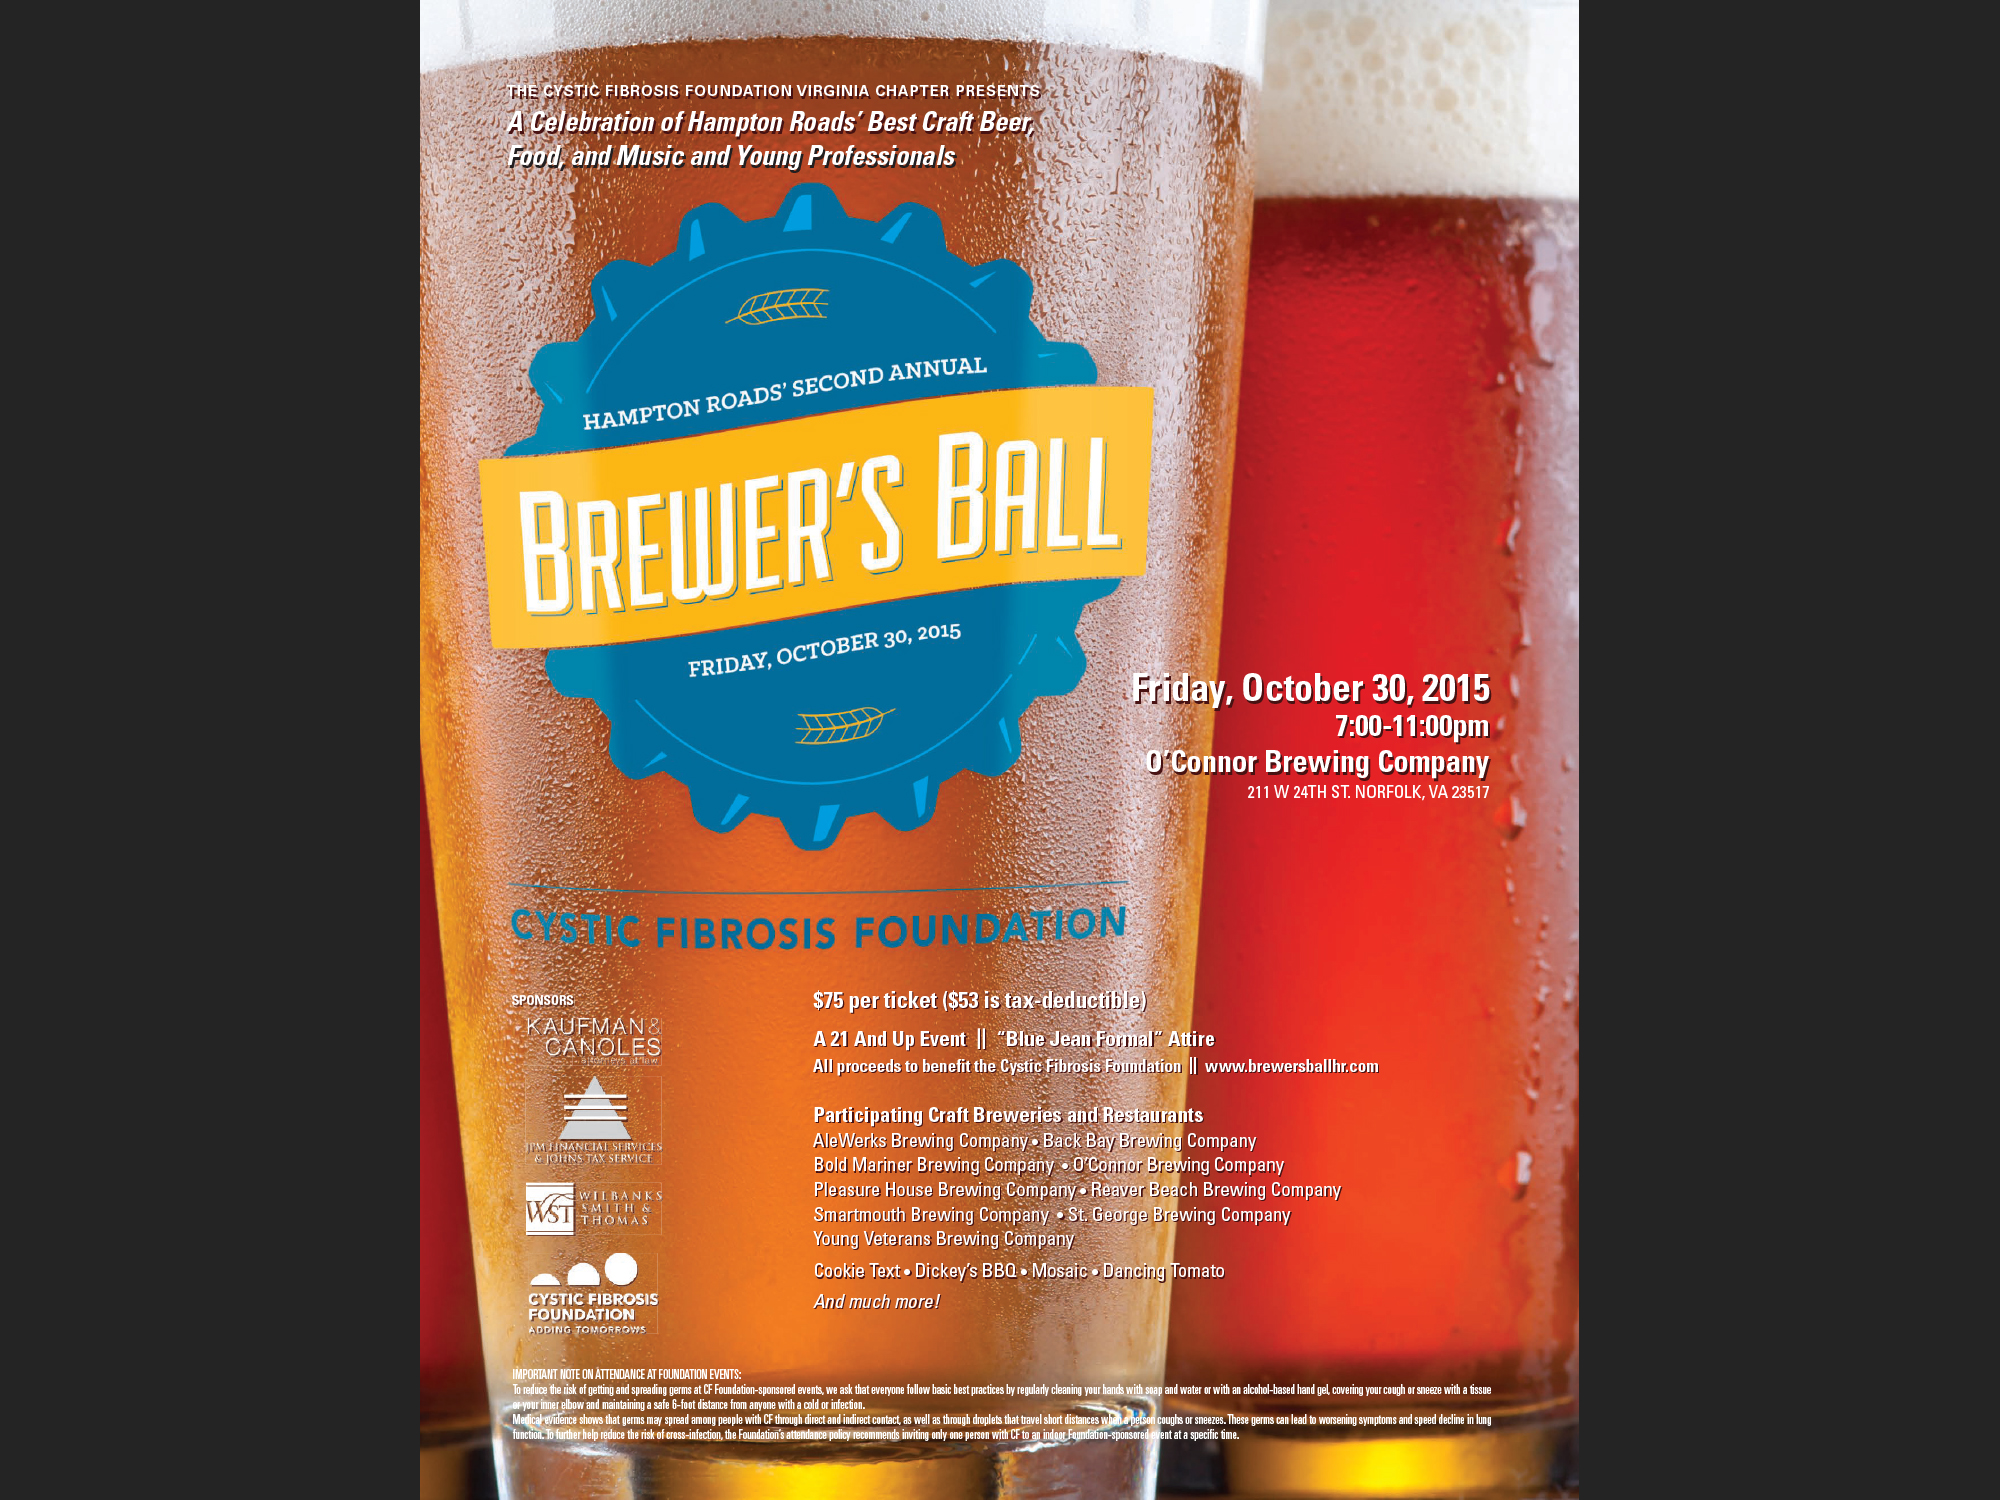 Brewer's Ball - Cystic Fibrosis Foundation, 2015; poster/flyer.